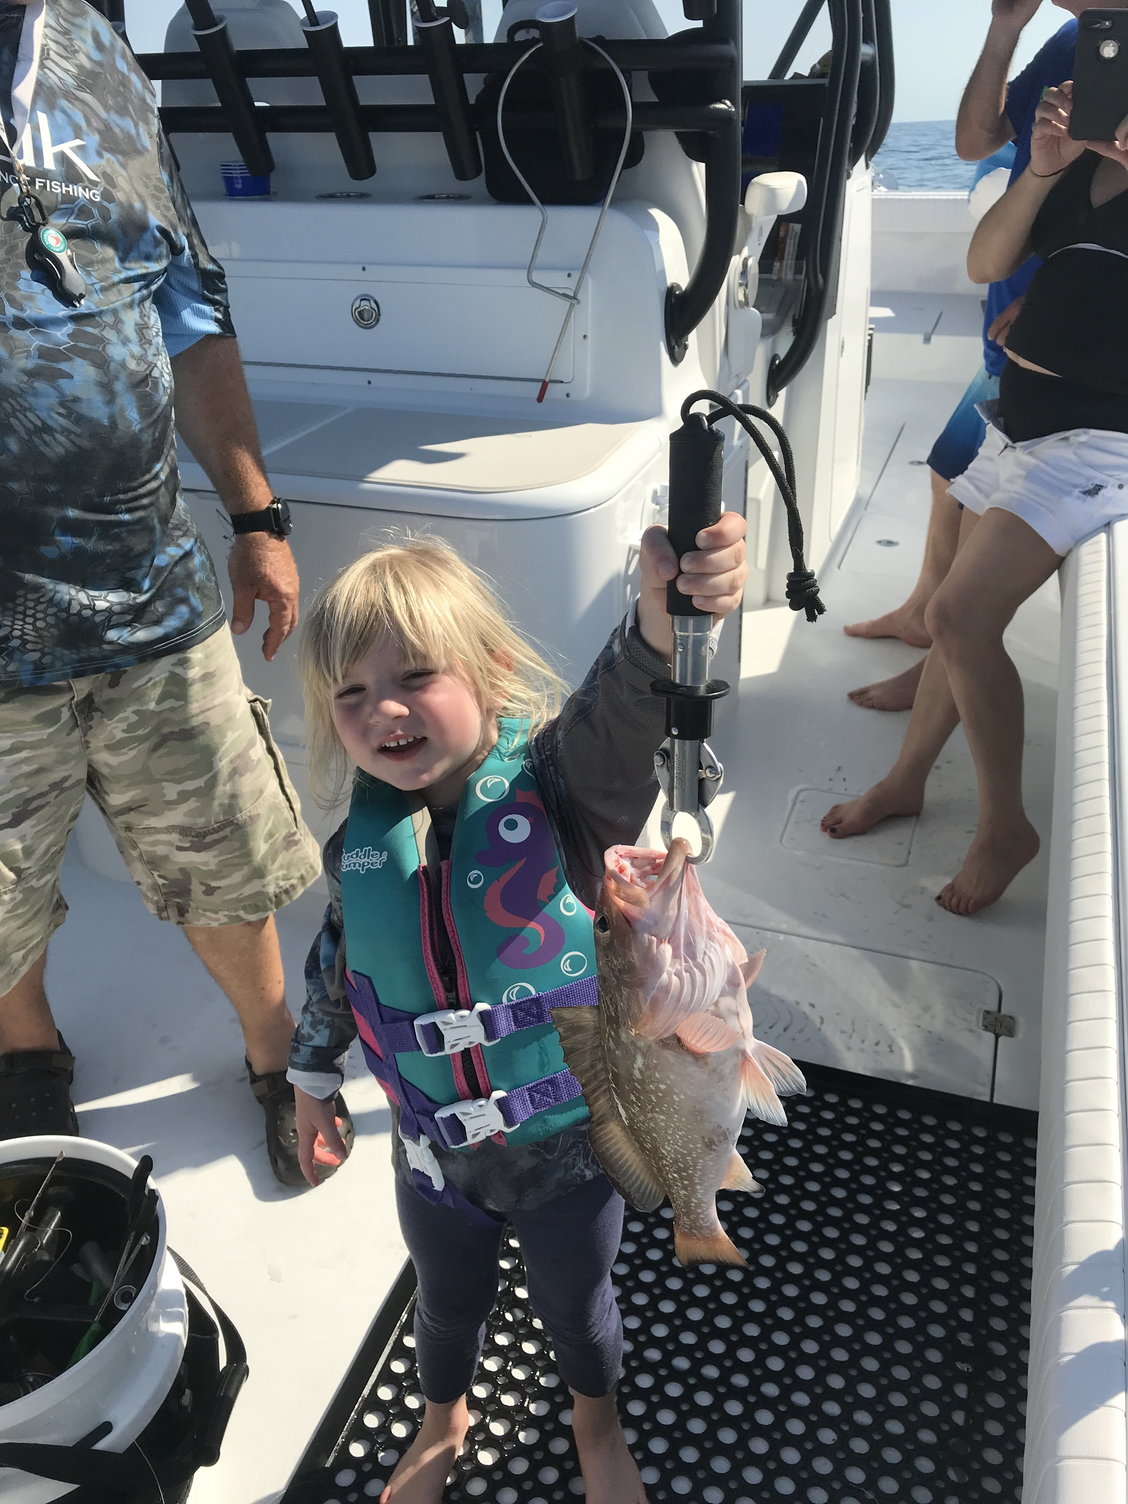 Best rod and reel for young kids? - The Hull Truth - Boating and